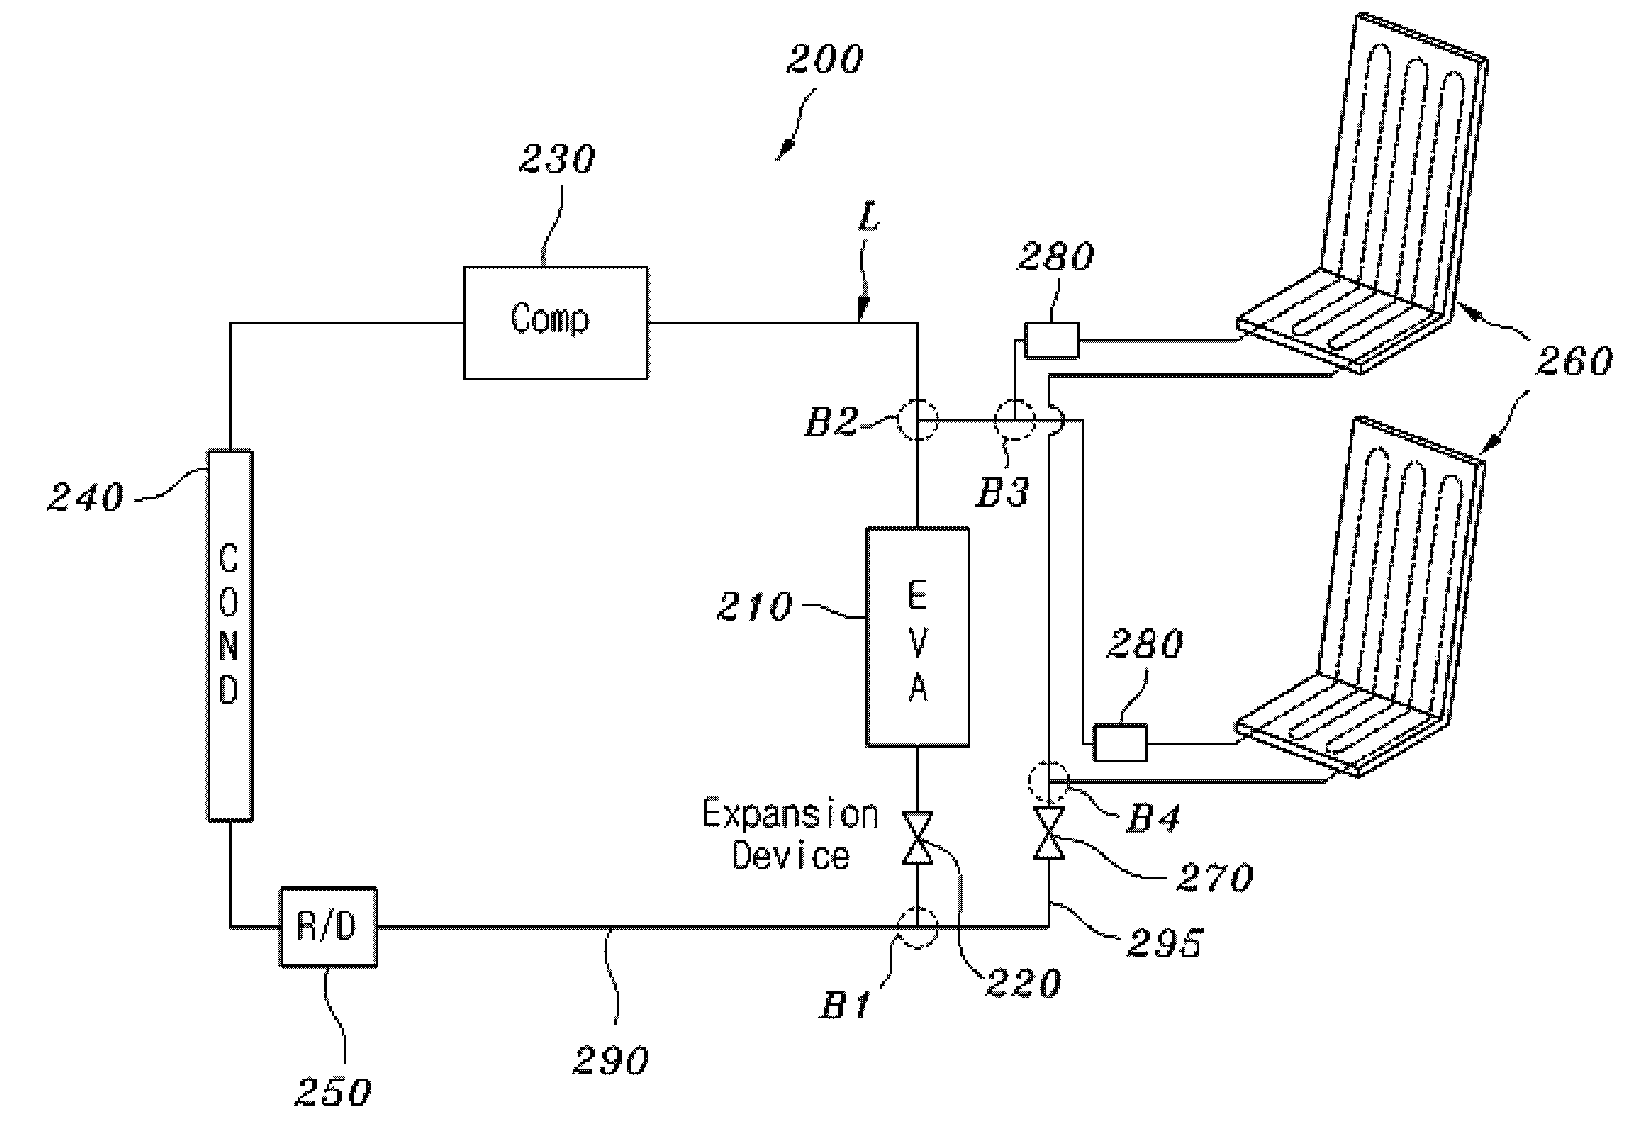 Internal cooling apparatus for automobiles